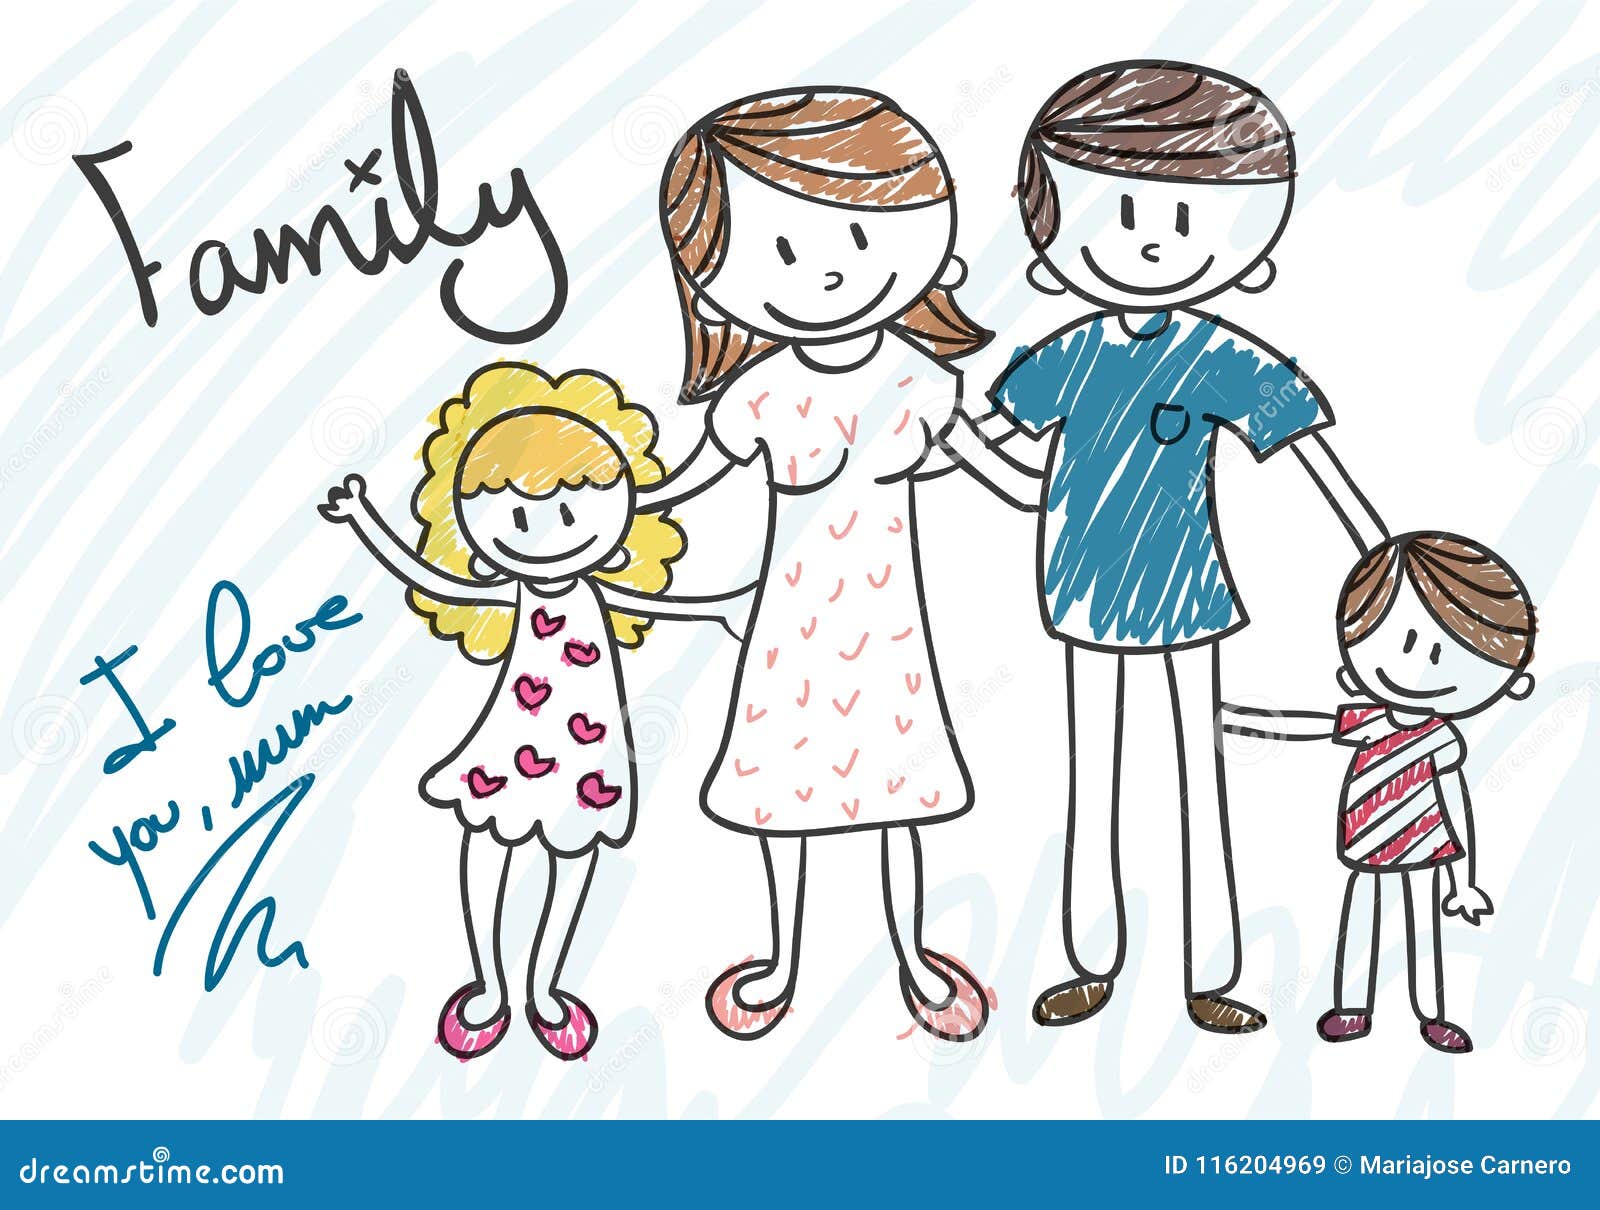 How To Draw A Family